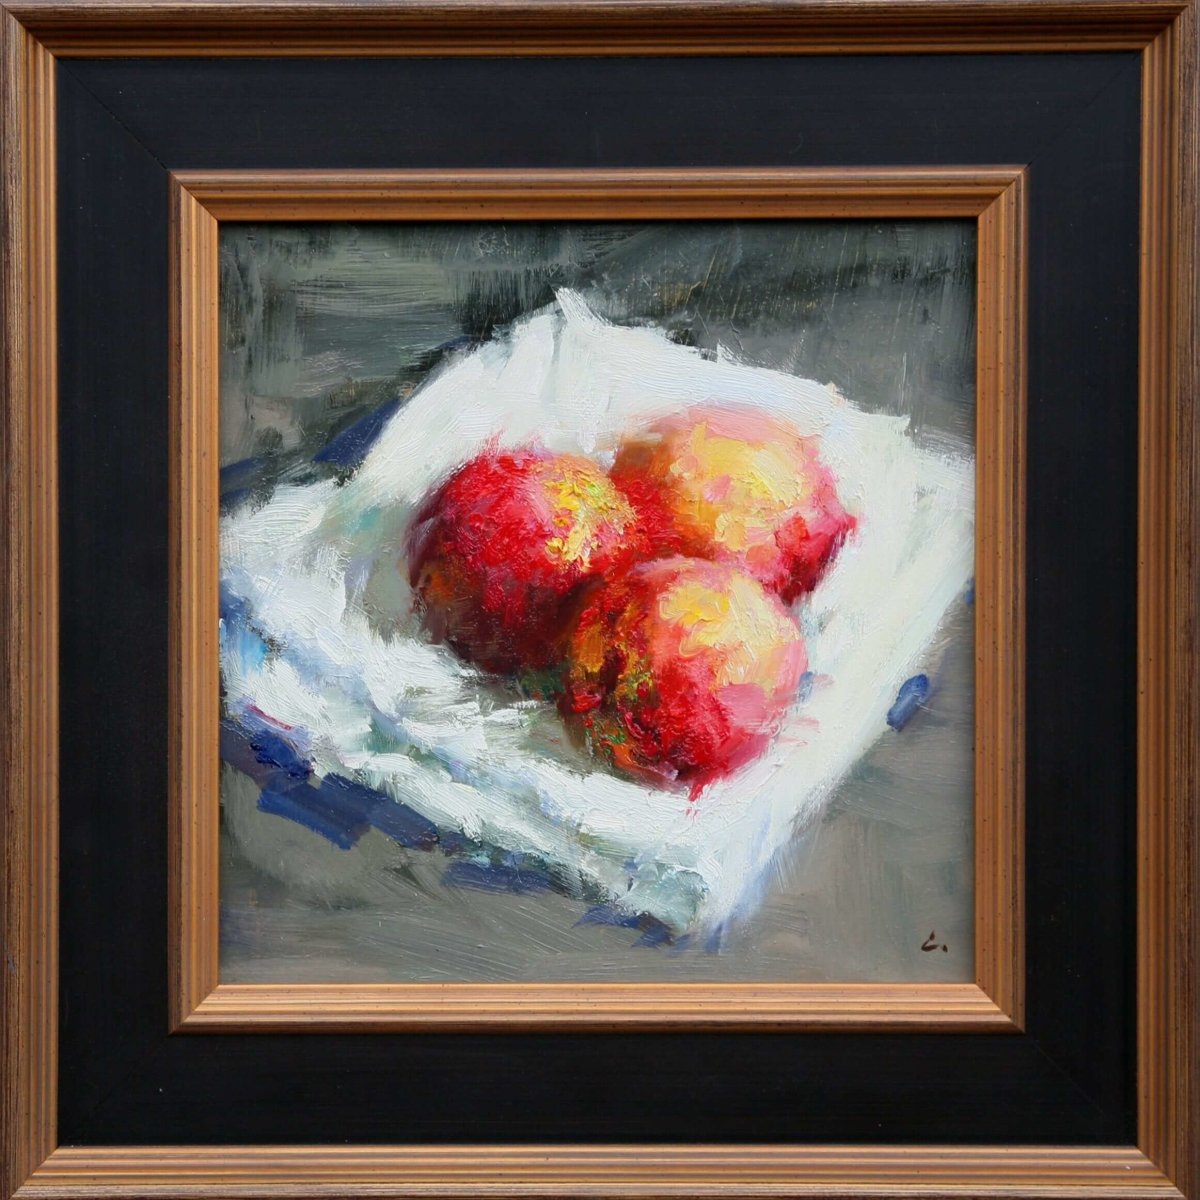 Peaches on White by Ning Lee at LePrince Galleries